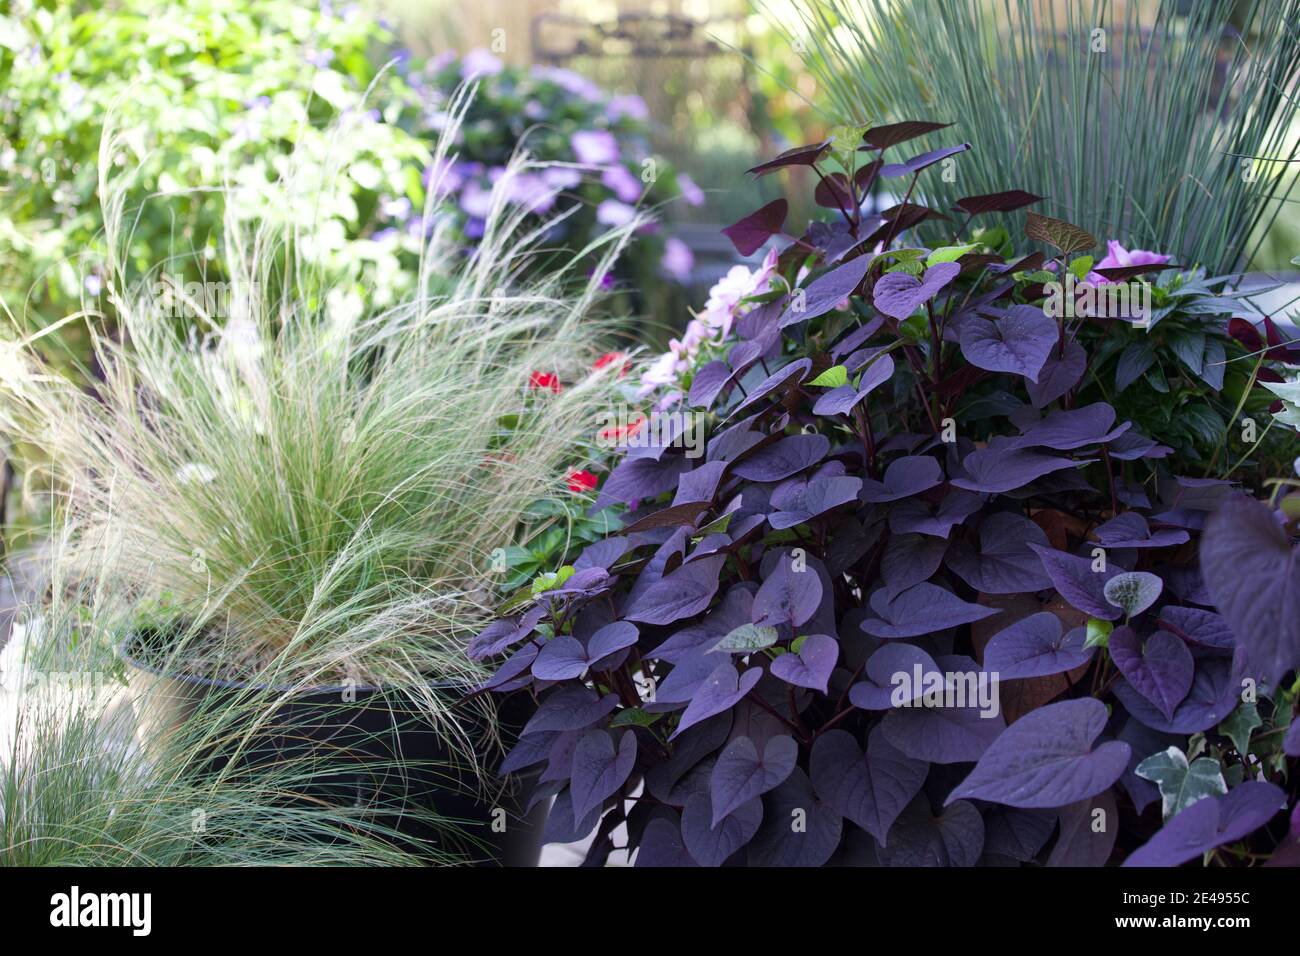 Purple sweet potato vine and extremely versatile vine, intermingled with Mexican Feathergrass in garden containers on the patio Stock Photo